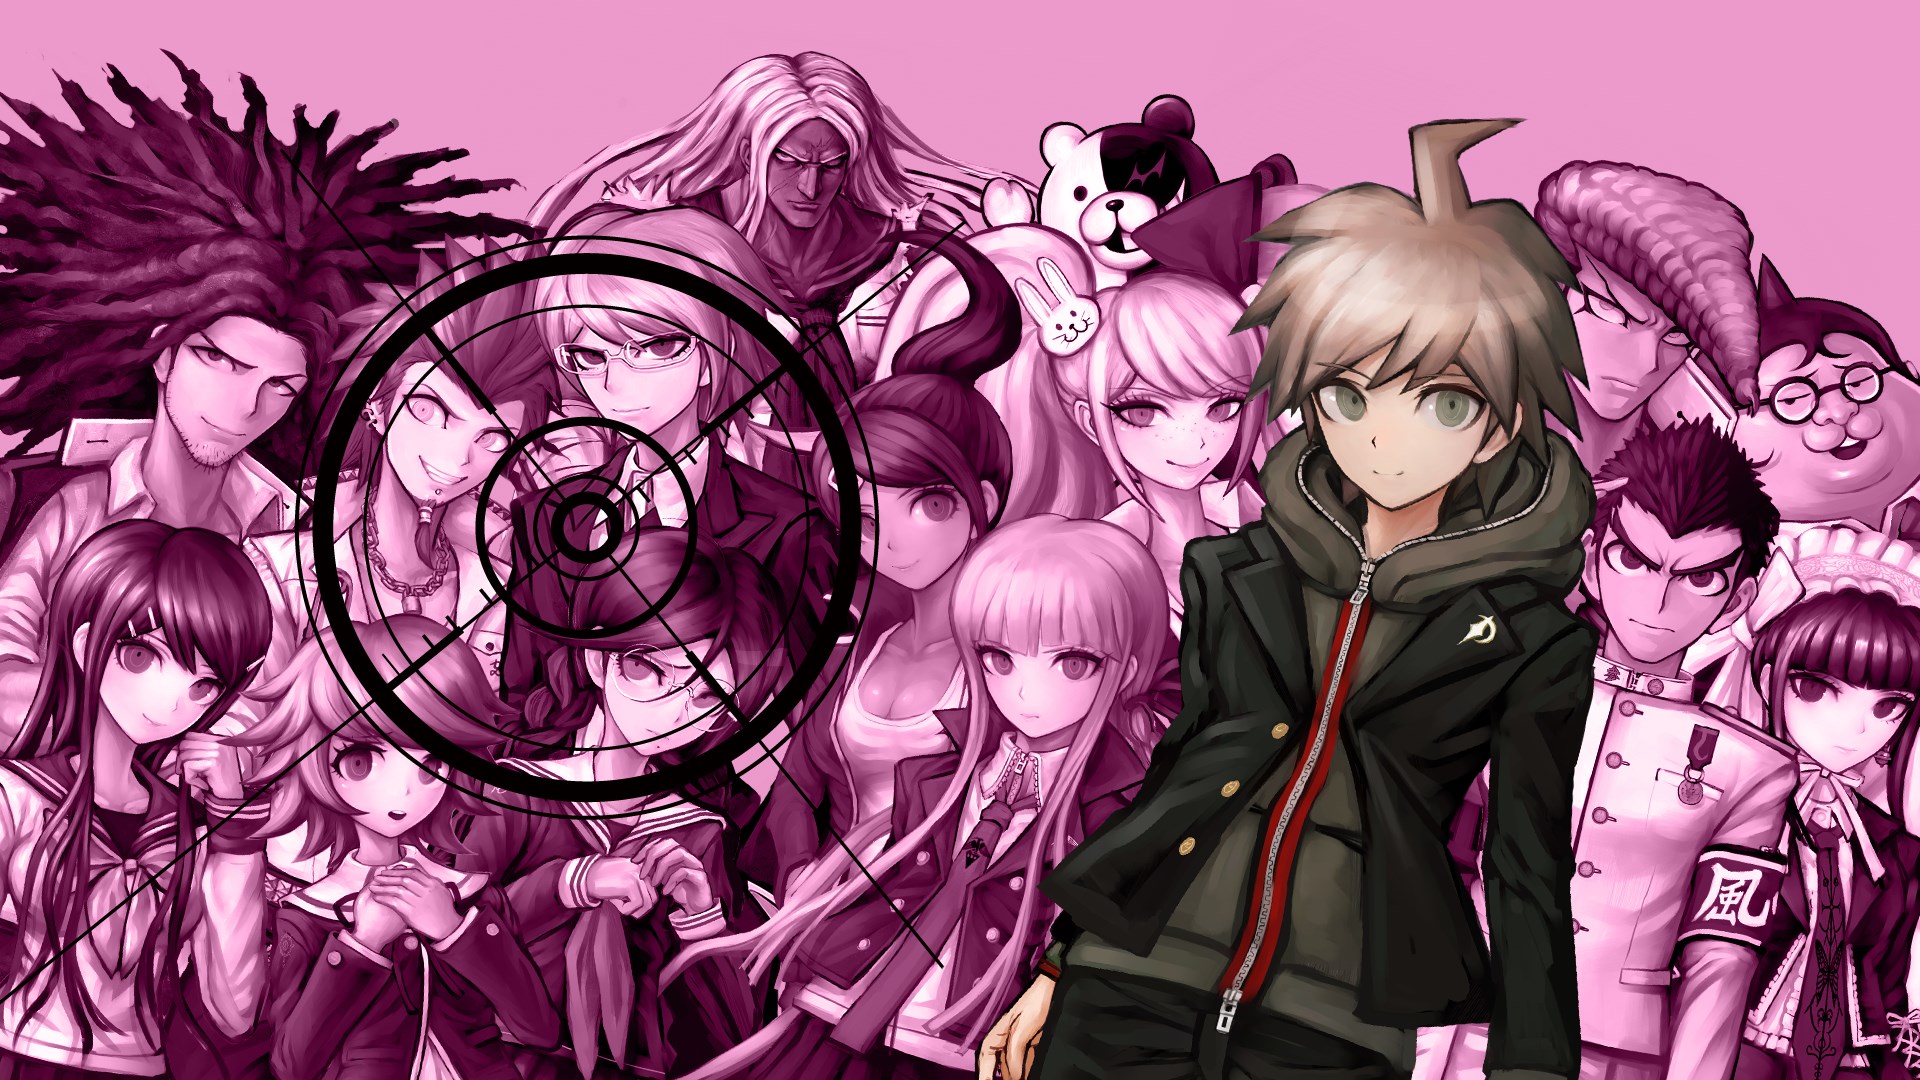 Danganronpa characters in the background under an aim, one boy character standing on the front